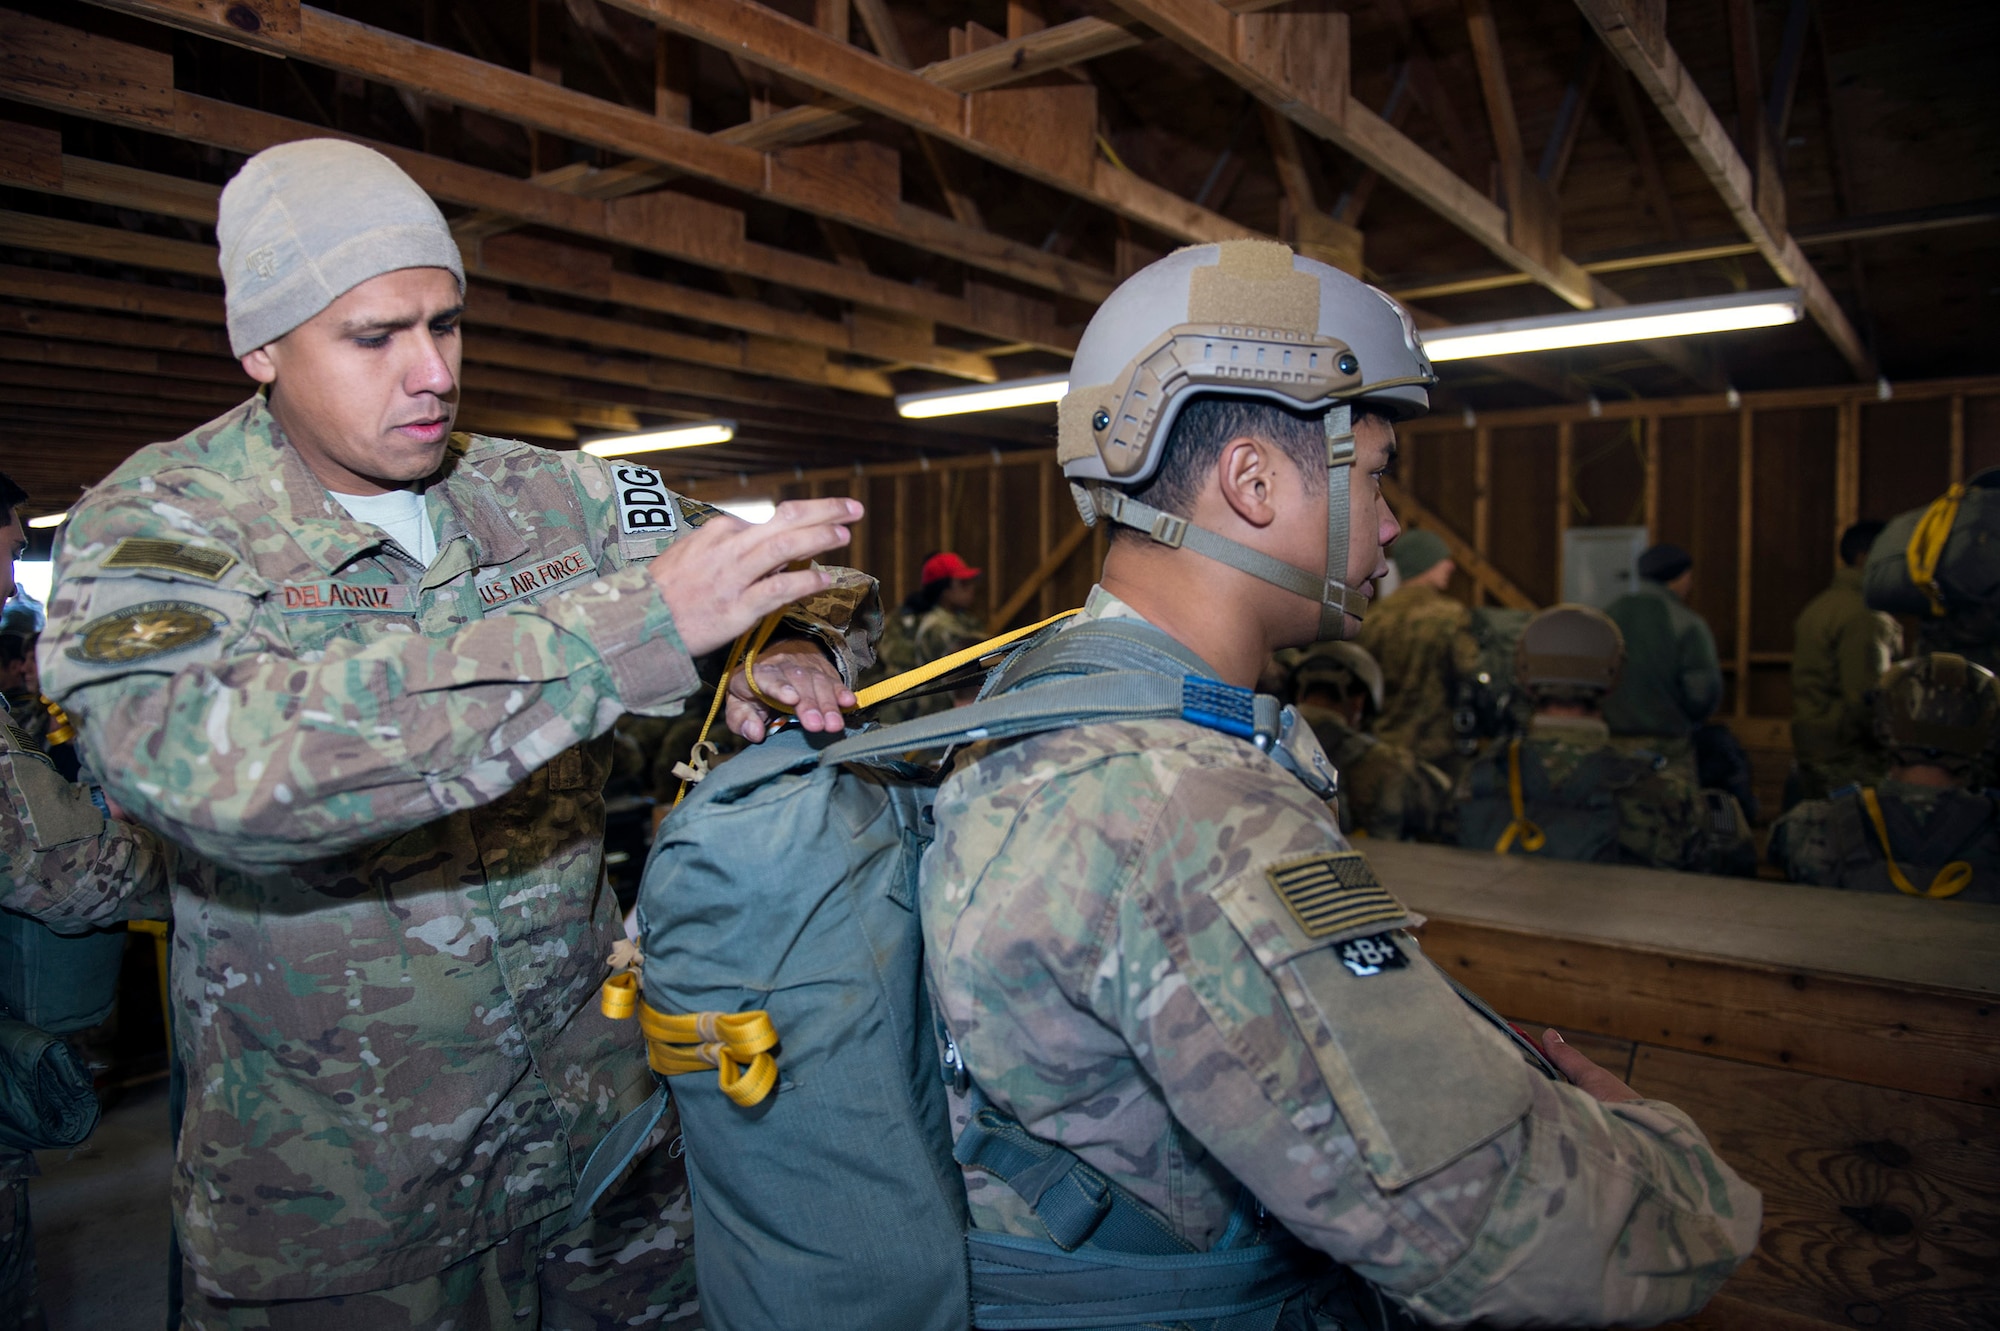 Master Sgt. Jason De La Cruz, 820th Combat Operations Squadron parachute program manager, conducts a jumpmaster personnel inspection on Senior Airman Emmanuel Magbanua, 822d Base Defense Squadron fireteam member, during the 19th Annual Randy Oler Memorial Operation Toy Drop, Dec. 15, 2016, at Mackall Army Air Field, N.C. Airmen from Moody’s 820th Base Defense Group participated in this exercise to enhance their ability to provide force protection with airborne capabilities at a moment’s notice. (U.S. Air Force photo by Airman 1st Class Greg Nash)   